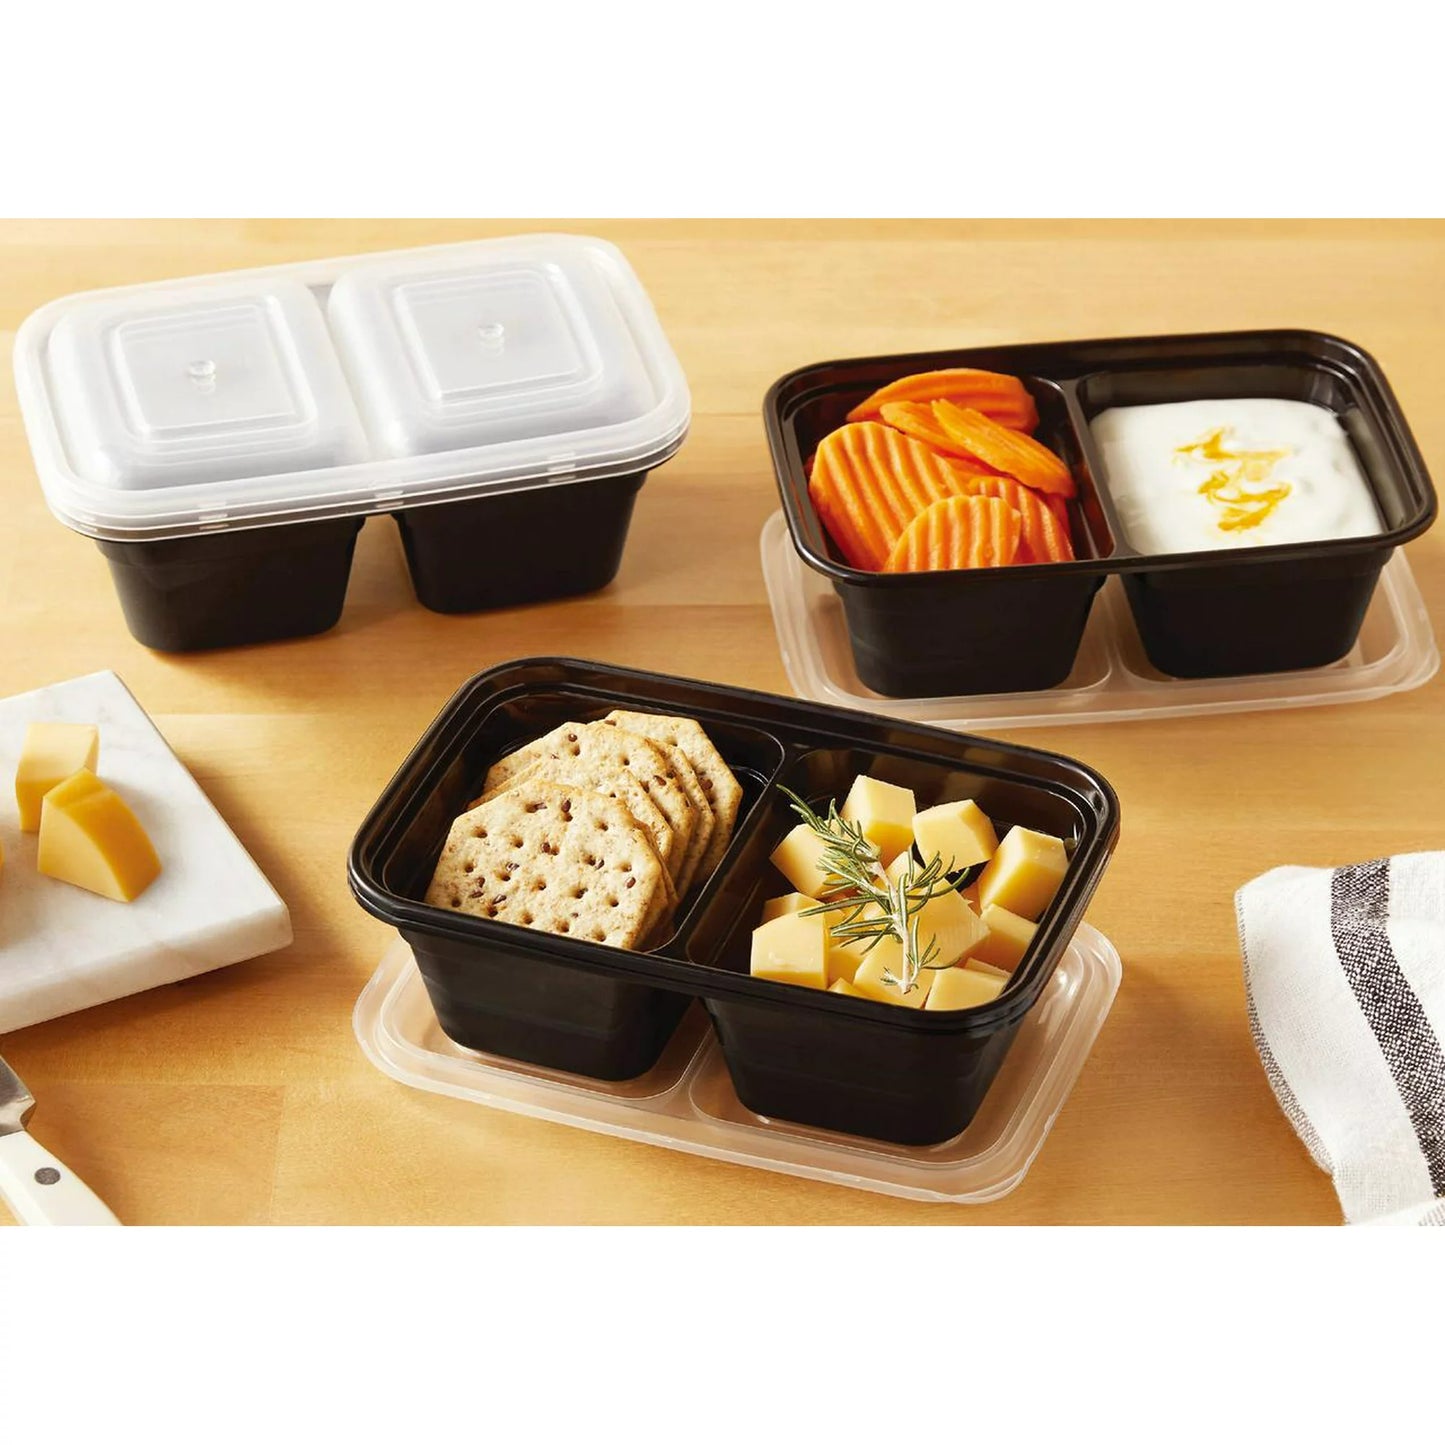 Mainstays 5PK 620ml Rectangular Snack Divider Meal Prep Container, Clear Lids & Black Containers